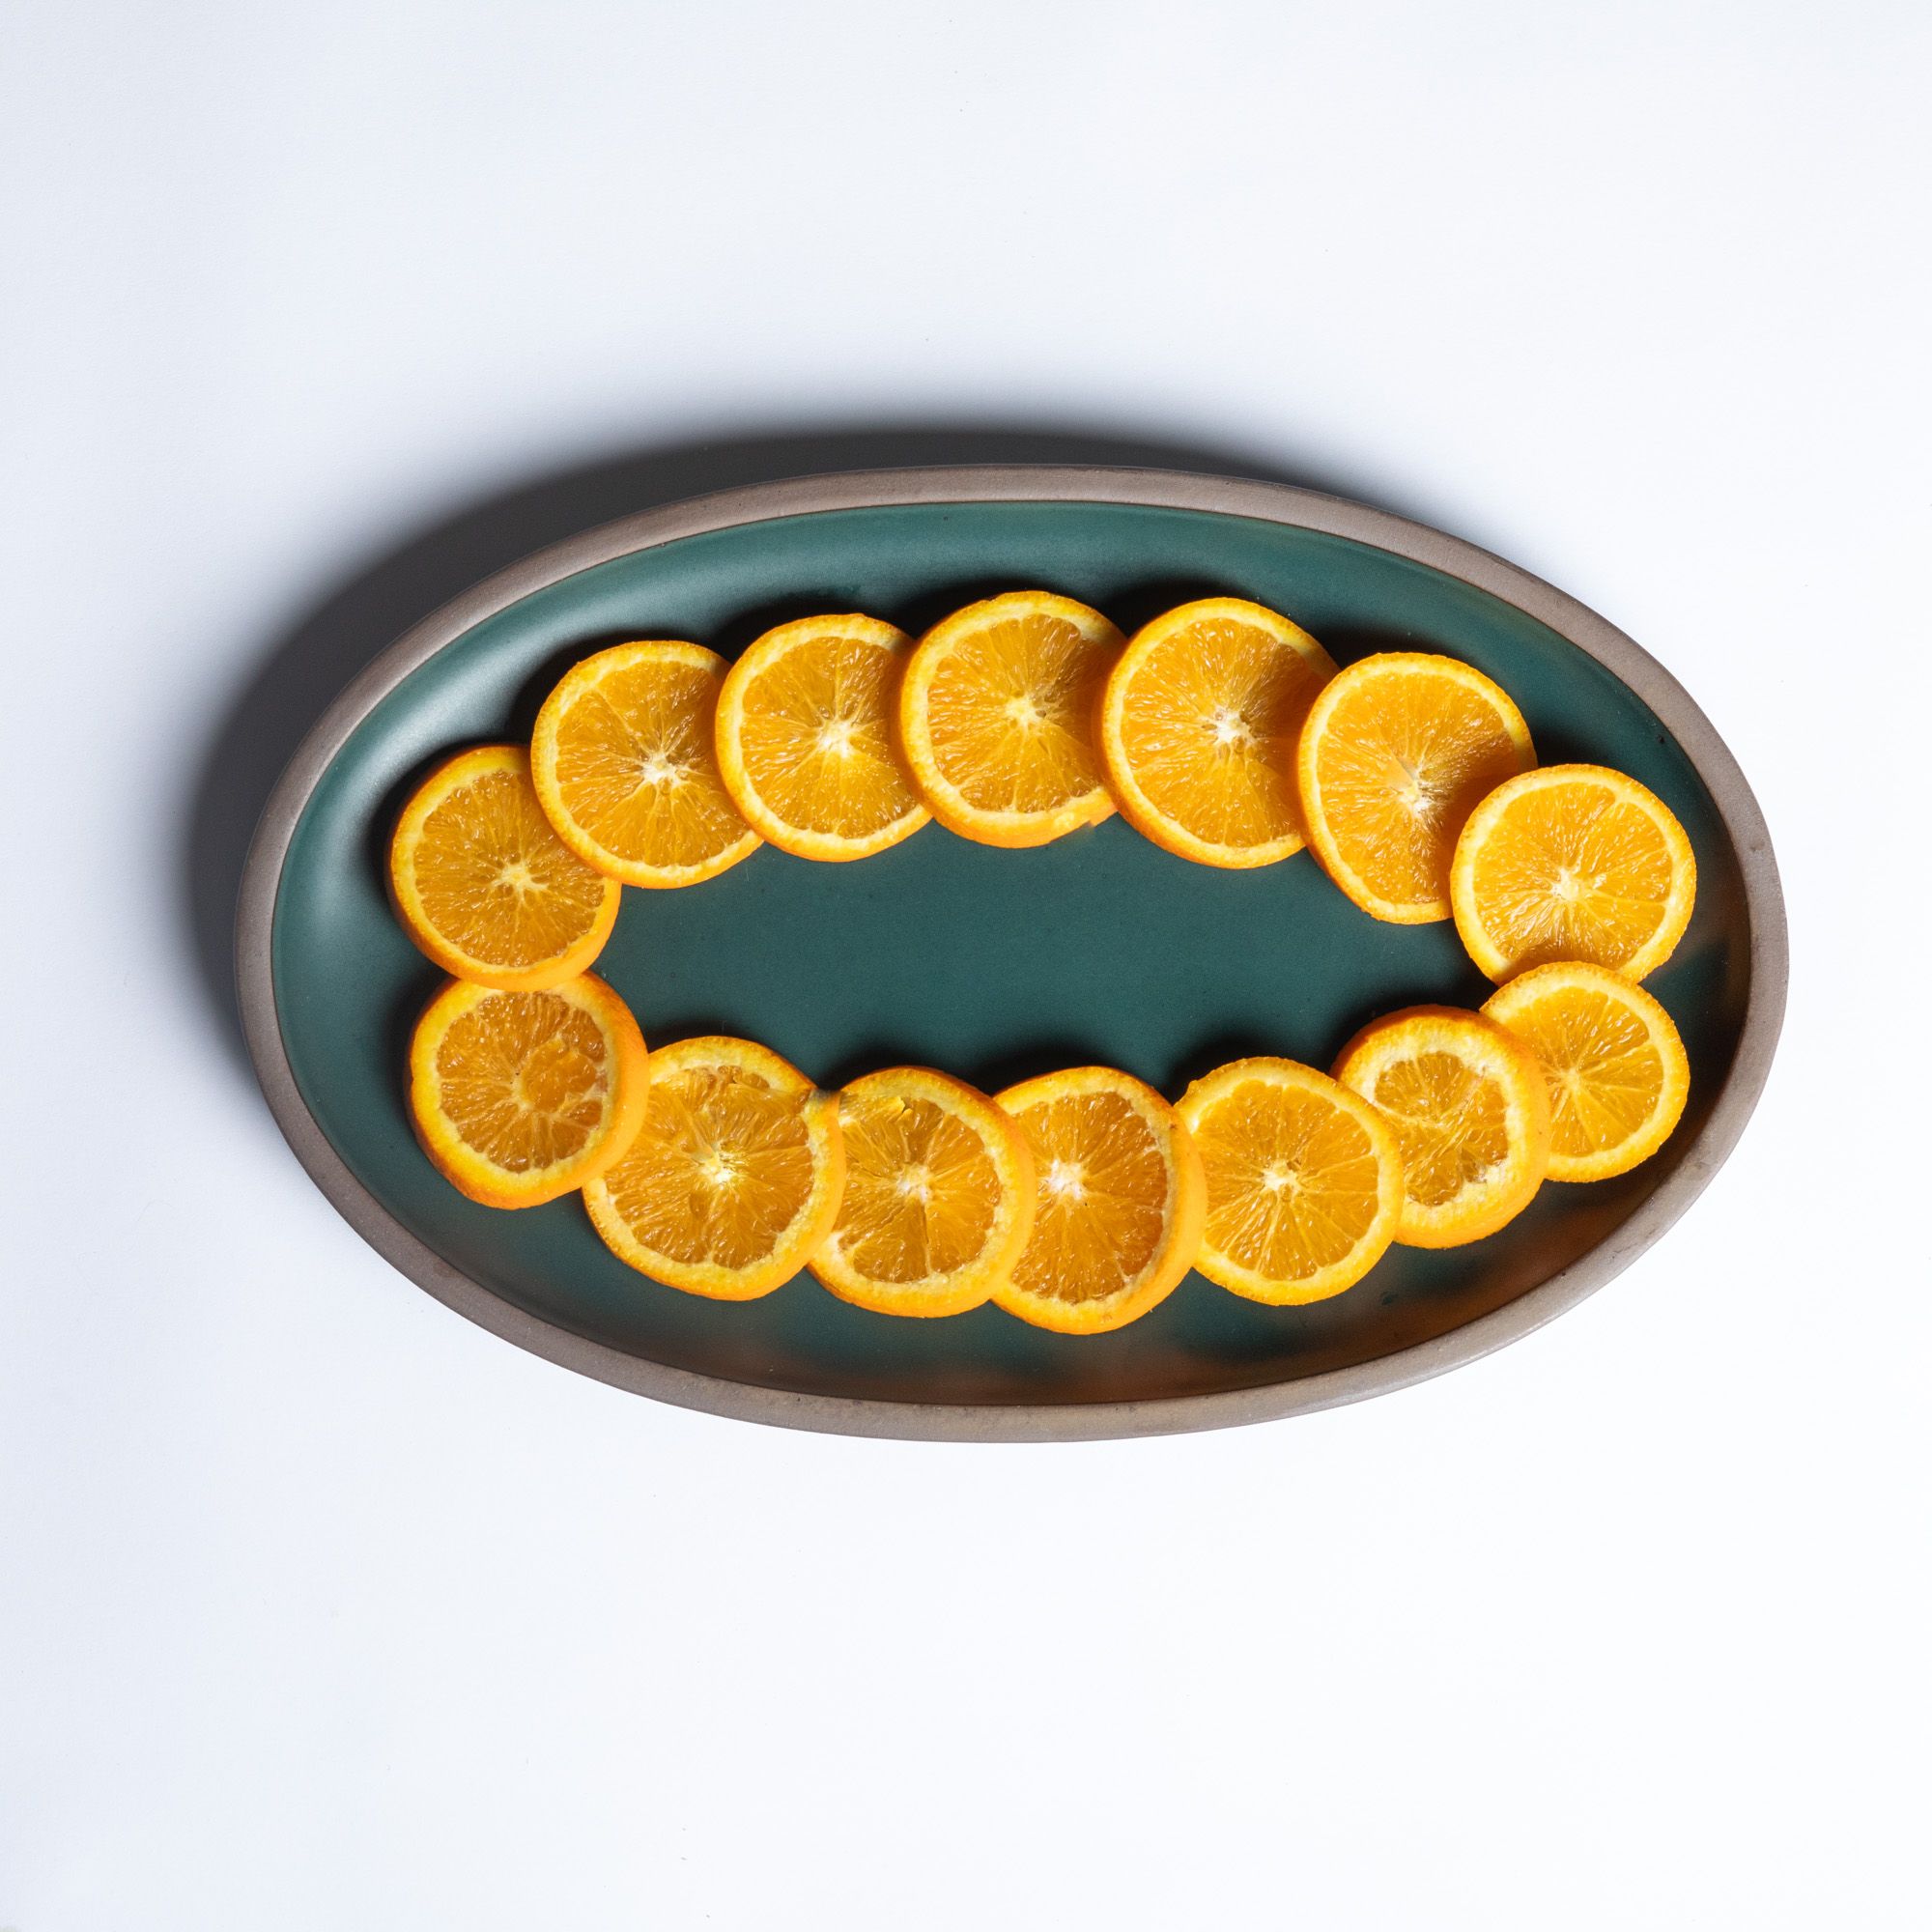 A large oval ceramic platter in a deep, dark teal color featuring iron speckles and an unglazed rim, with an oval of orange slices